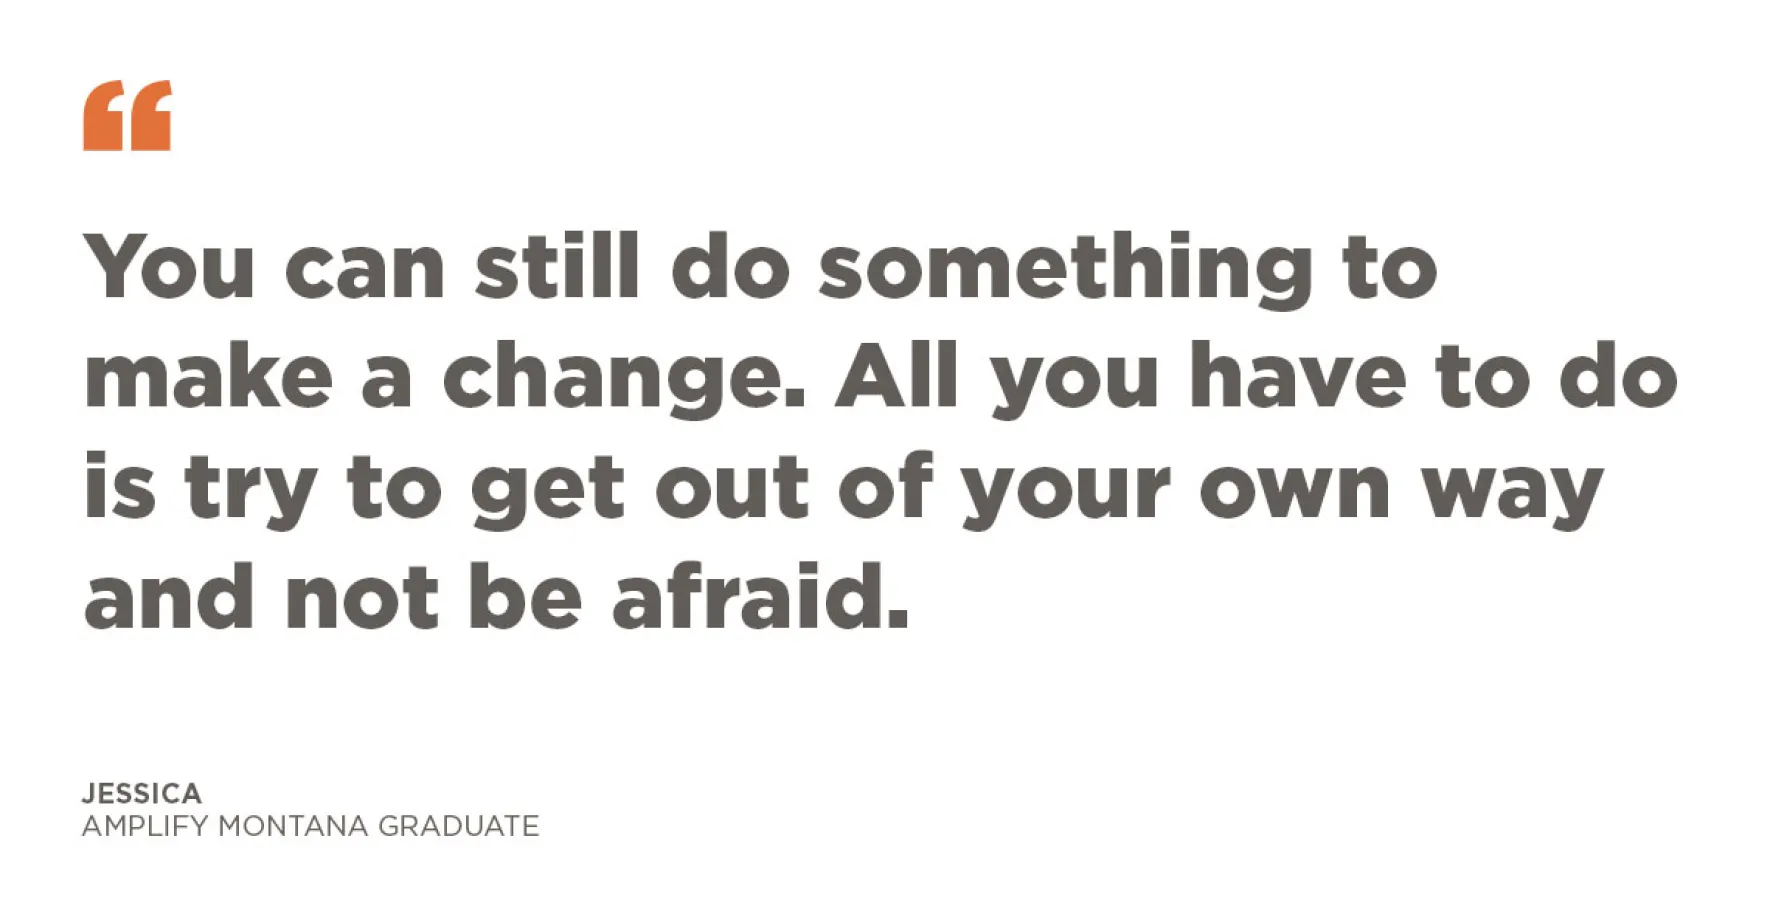 Quote graphic from text from the post. "You can still do something to make a change. All you have to do is try to get out of your own way and not be afraid."